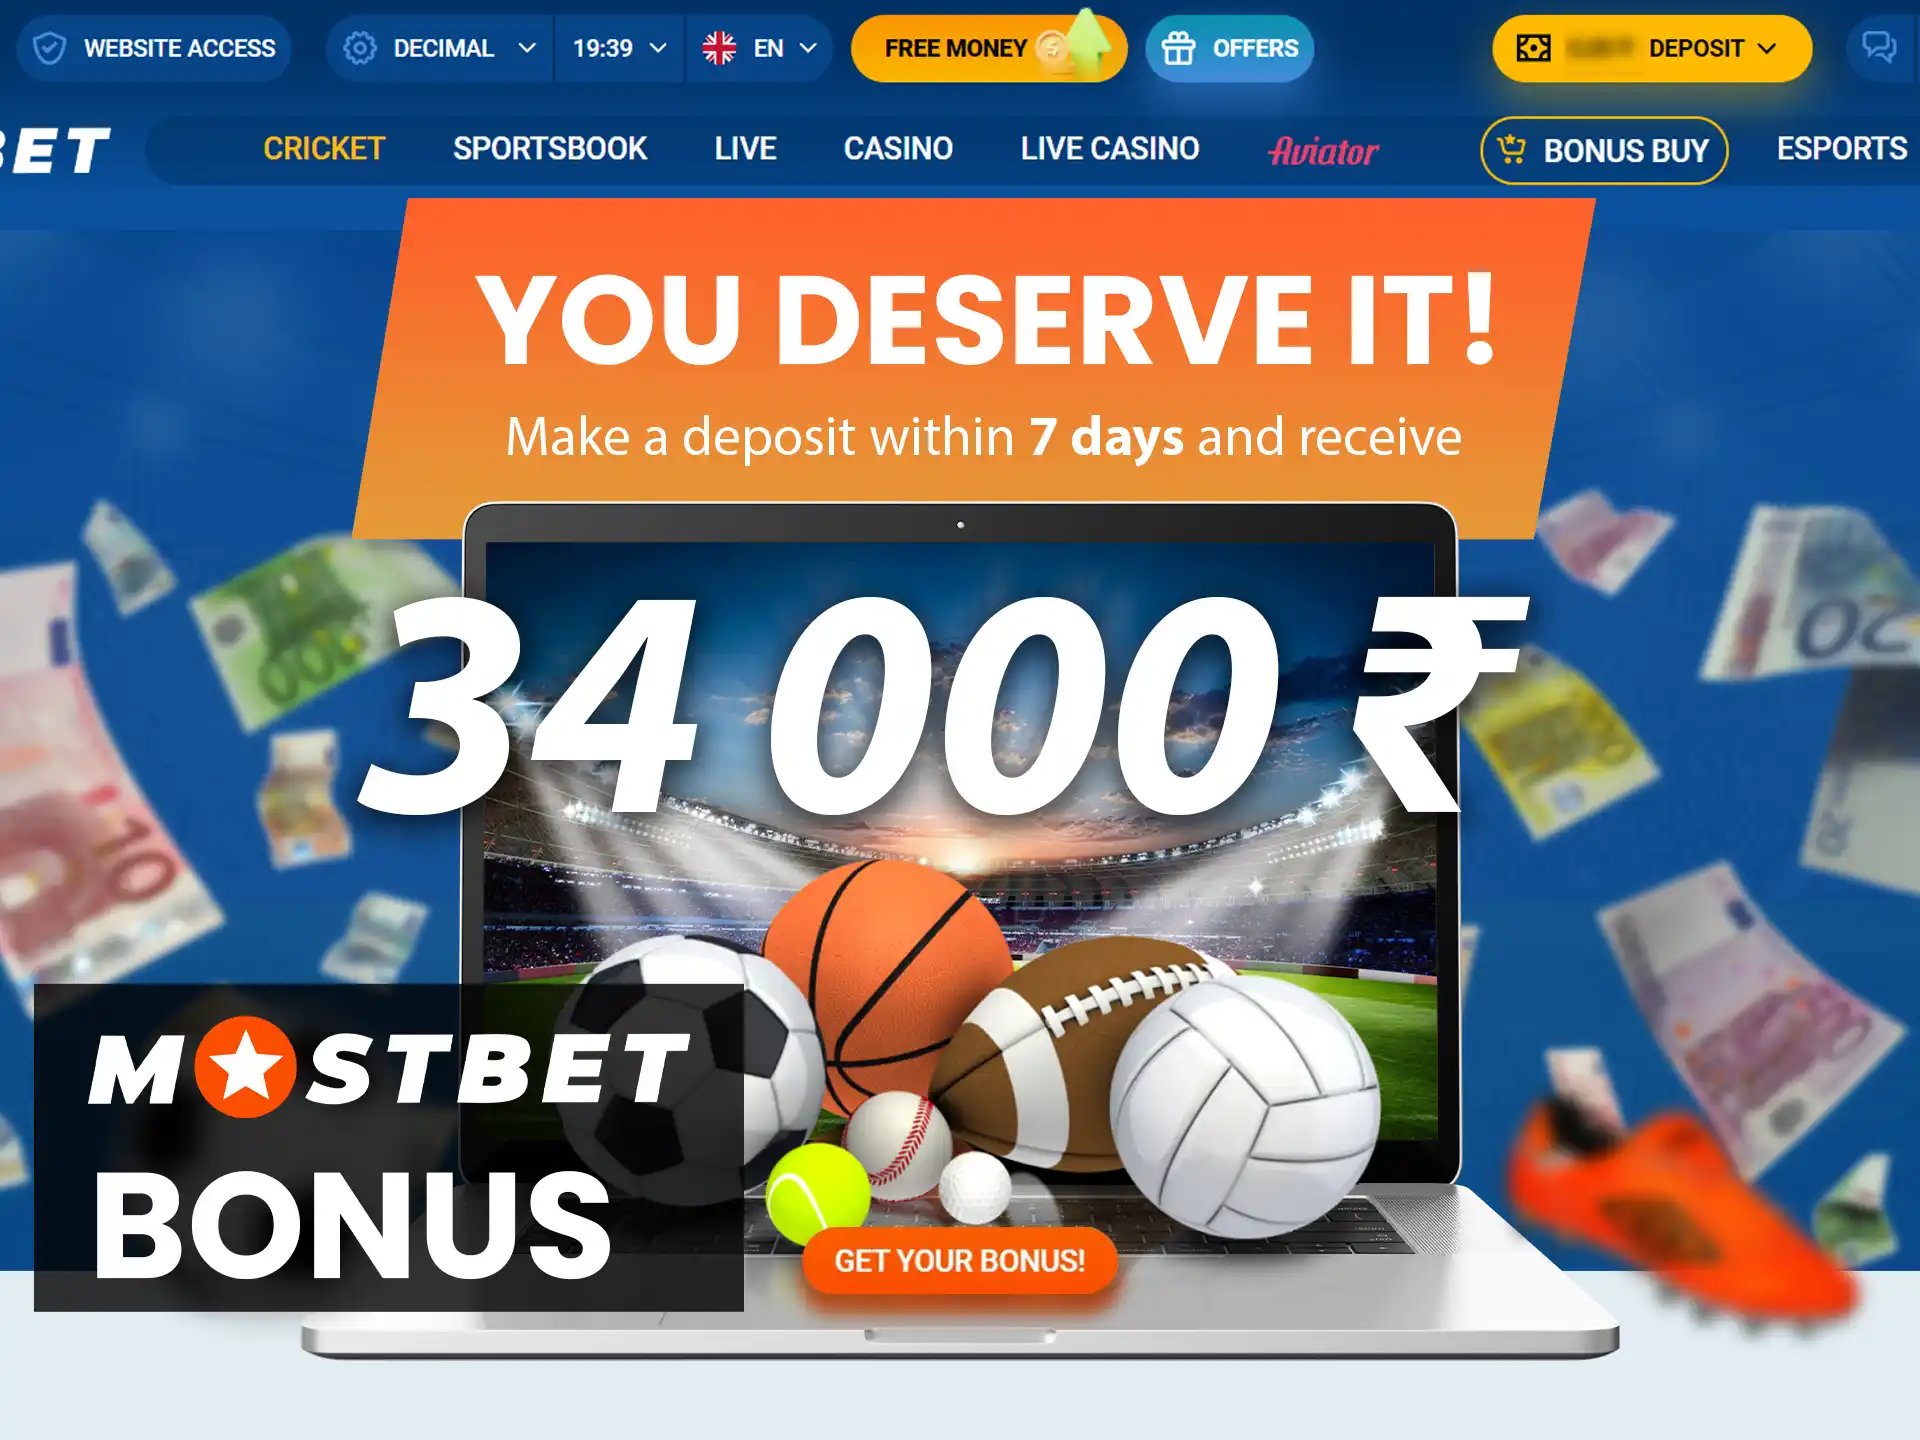 You can get up to 34,000 rupees for betting on sports at Mostbet.